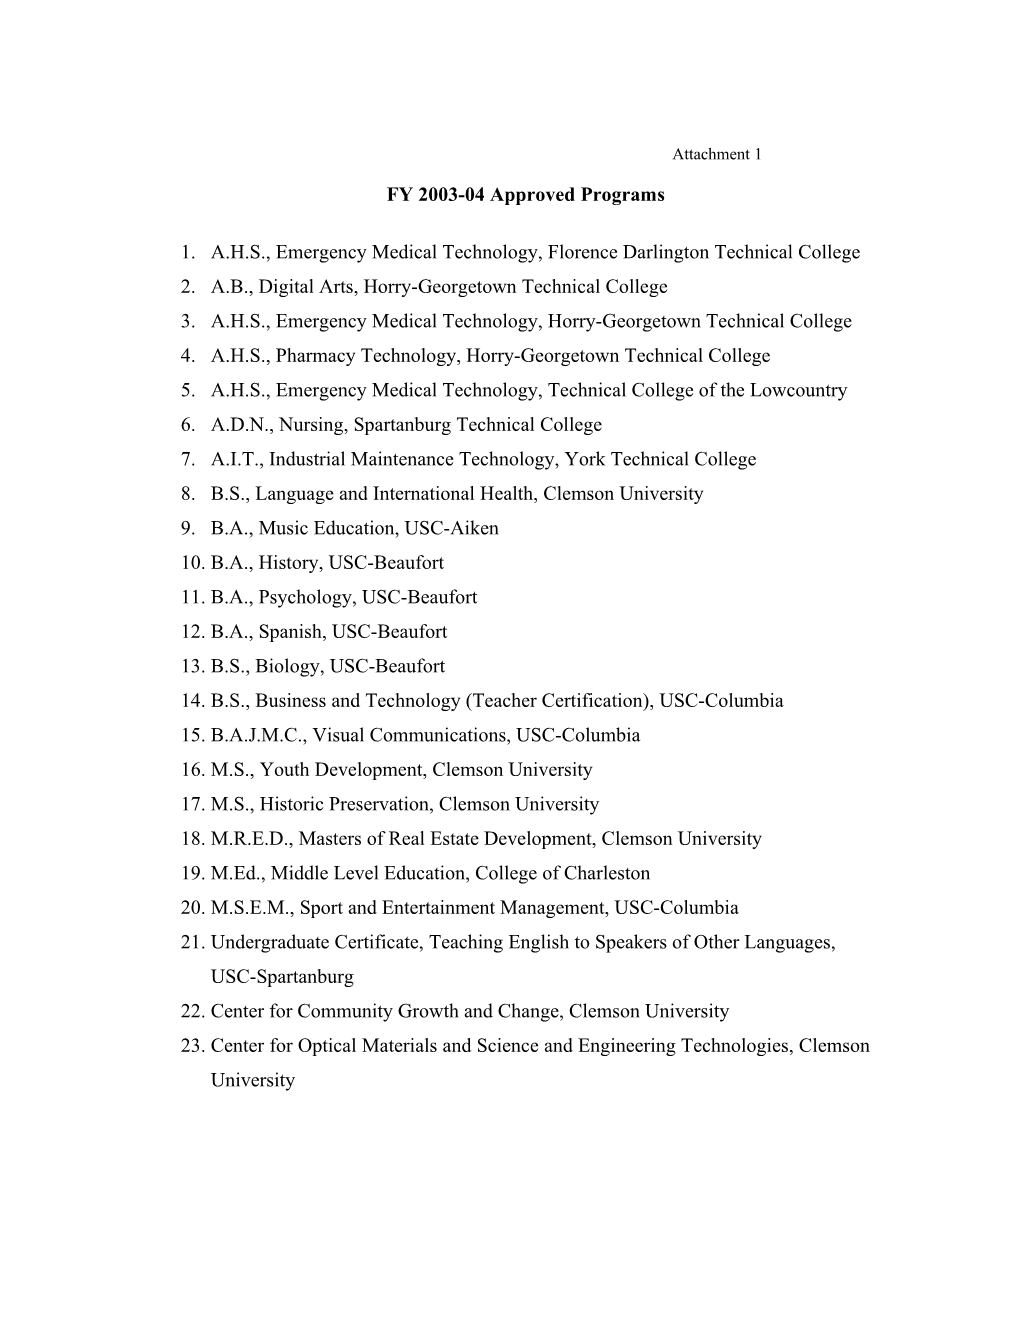 FY 2003-04 Approved Programs